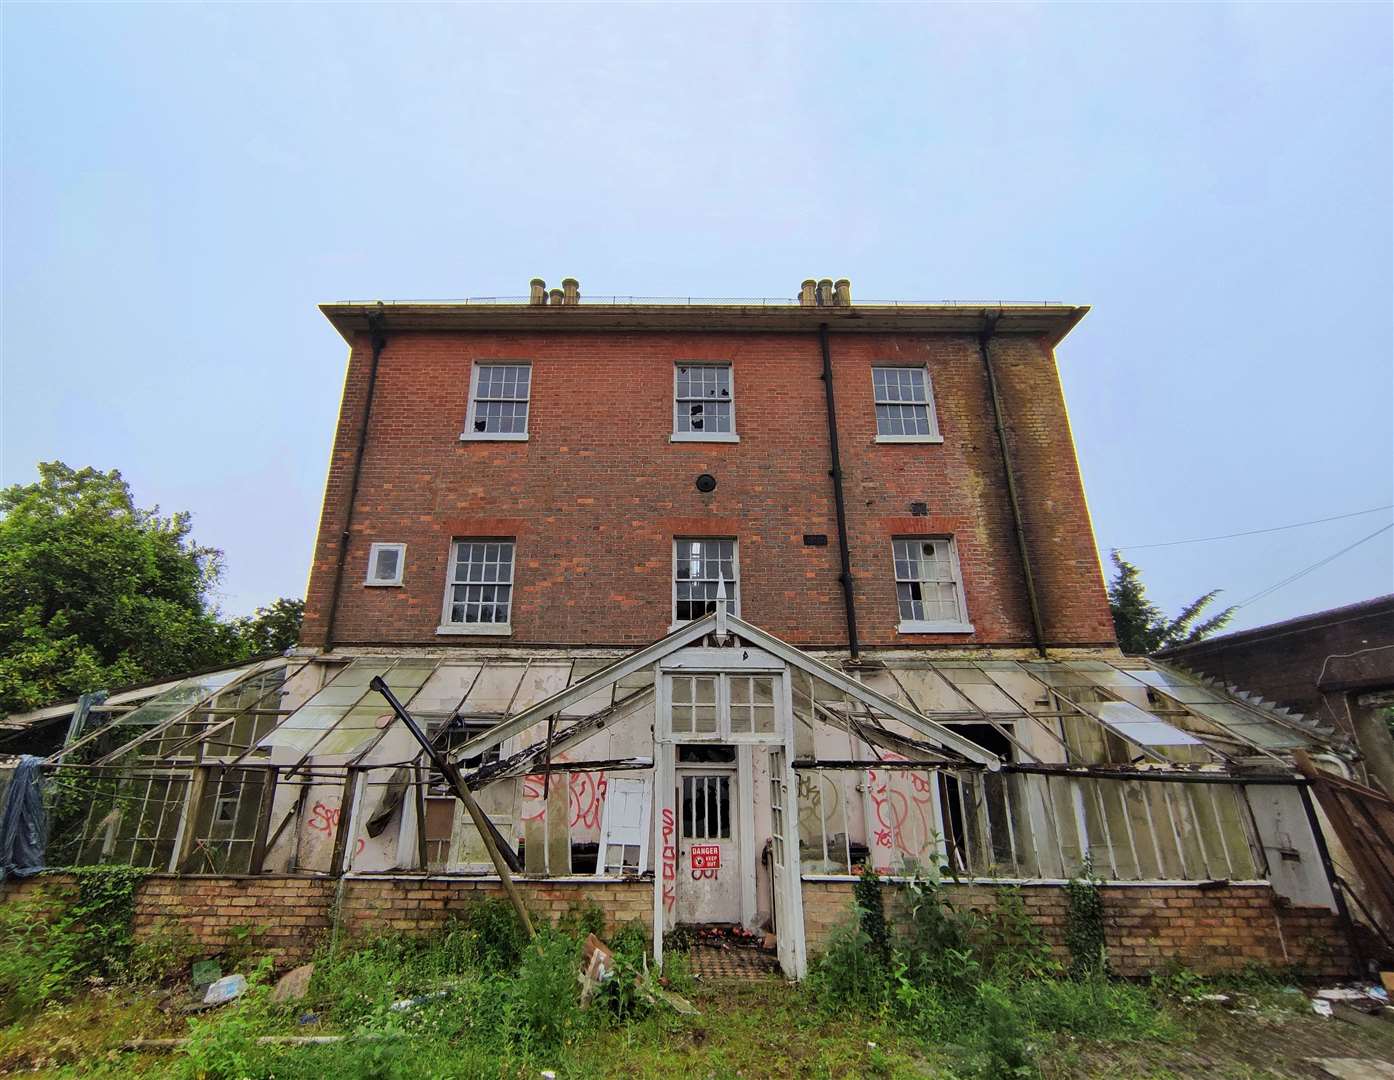 Belringham House in Sutton Valence as it looked just before the fire. Picture by @lost_property_devon